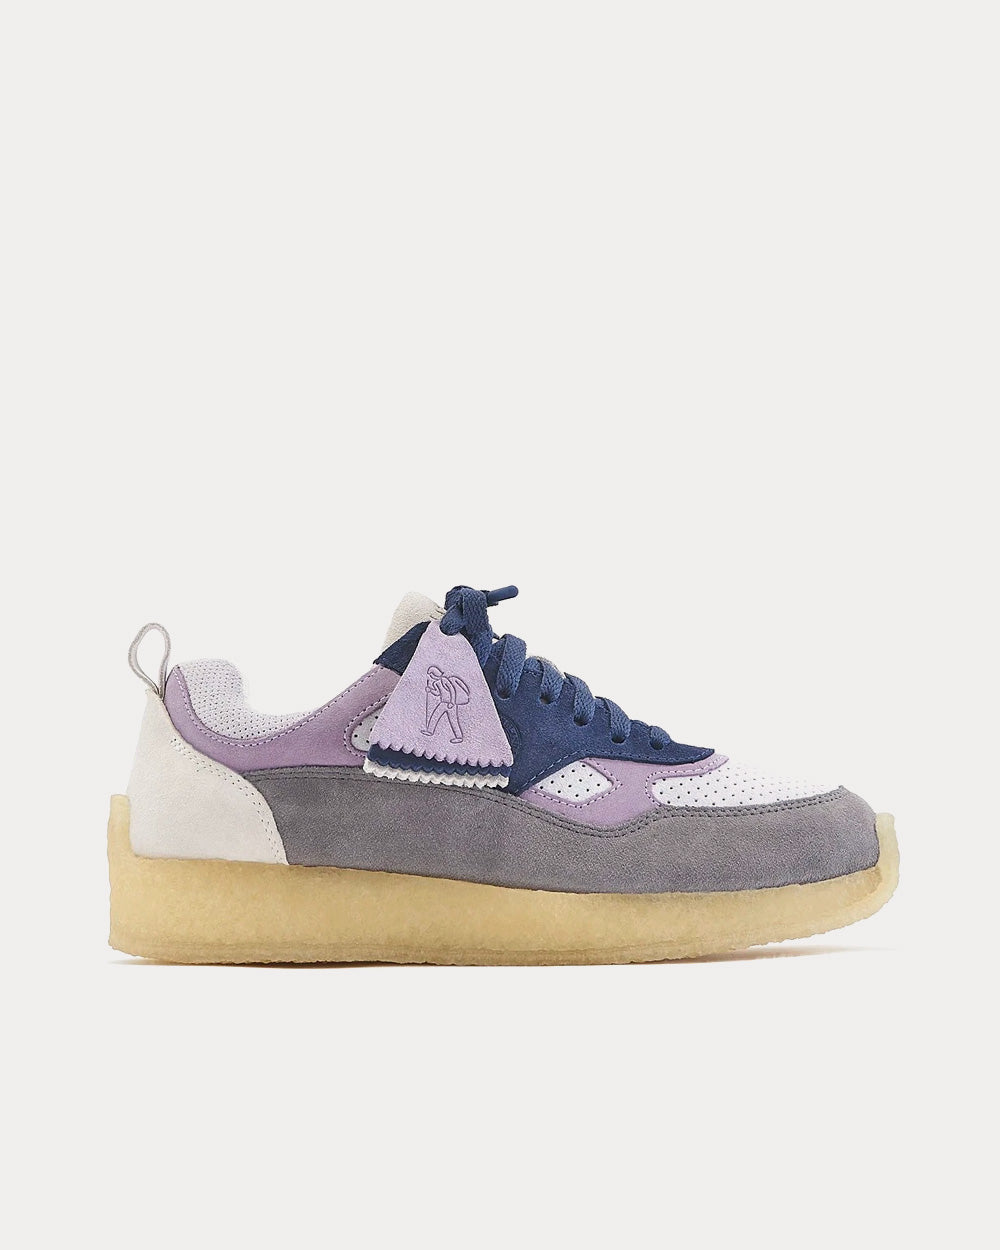 Clarks x Kith - Lockhill Suede Purple Low Top Sneakers